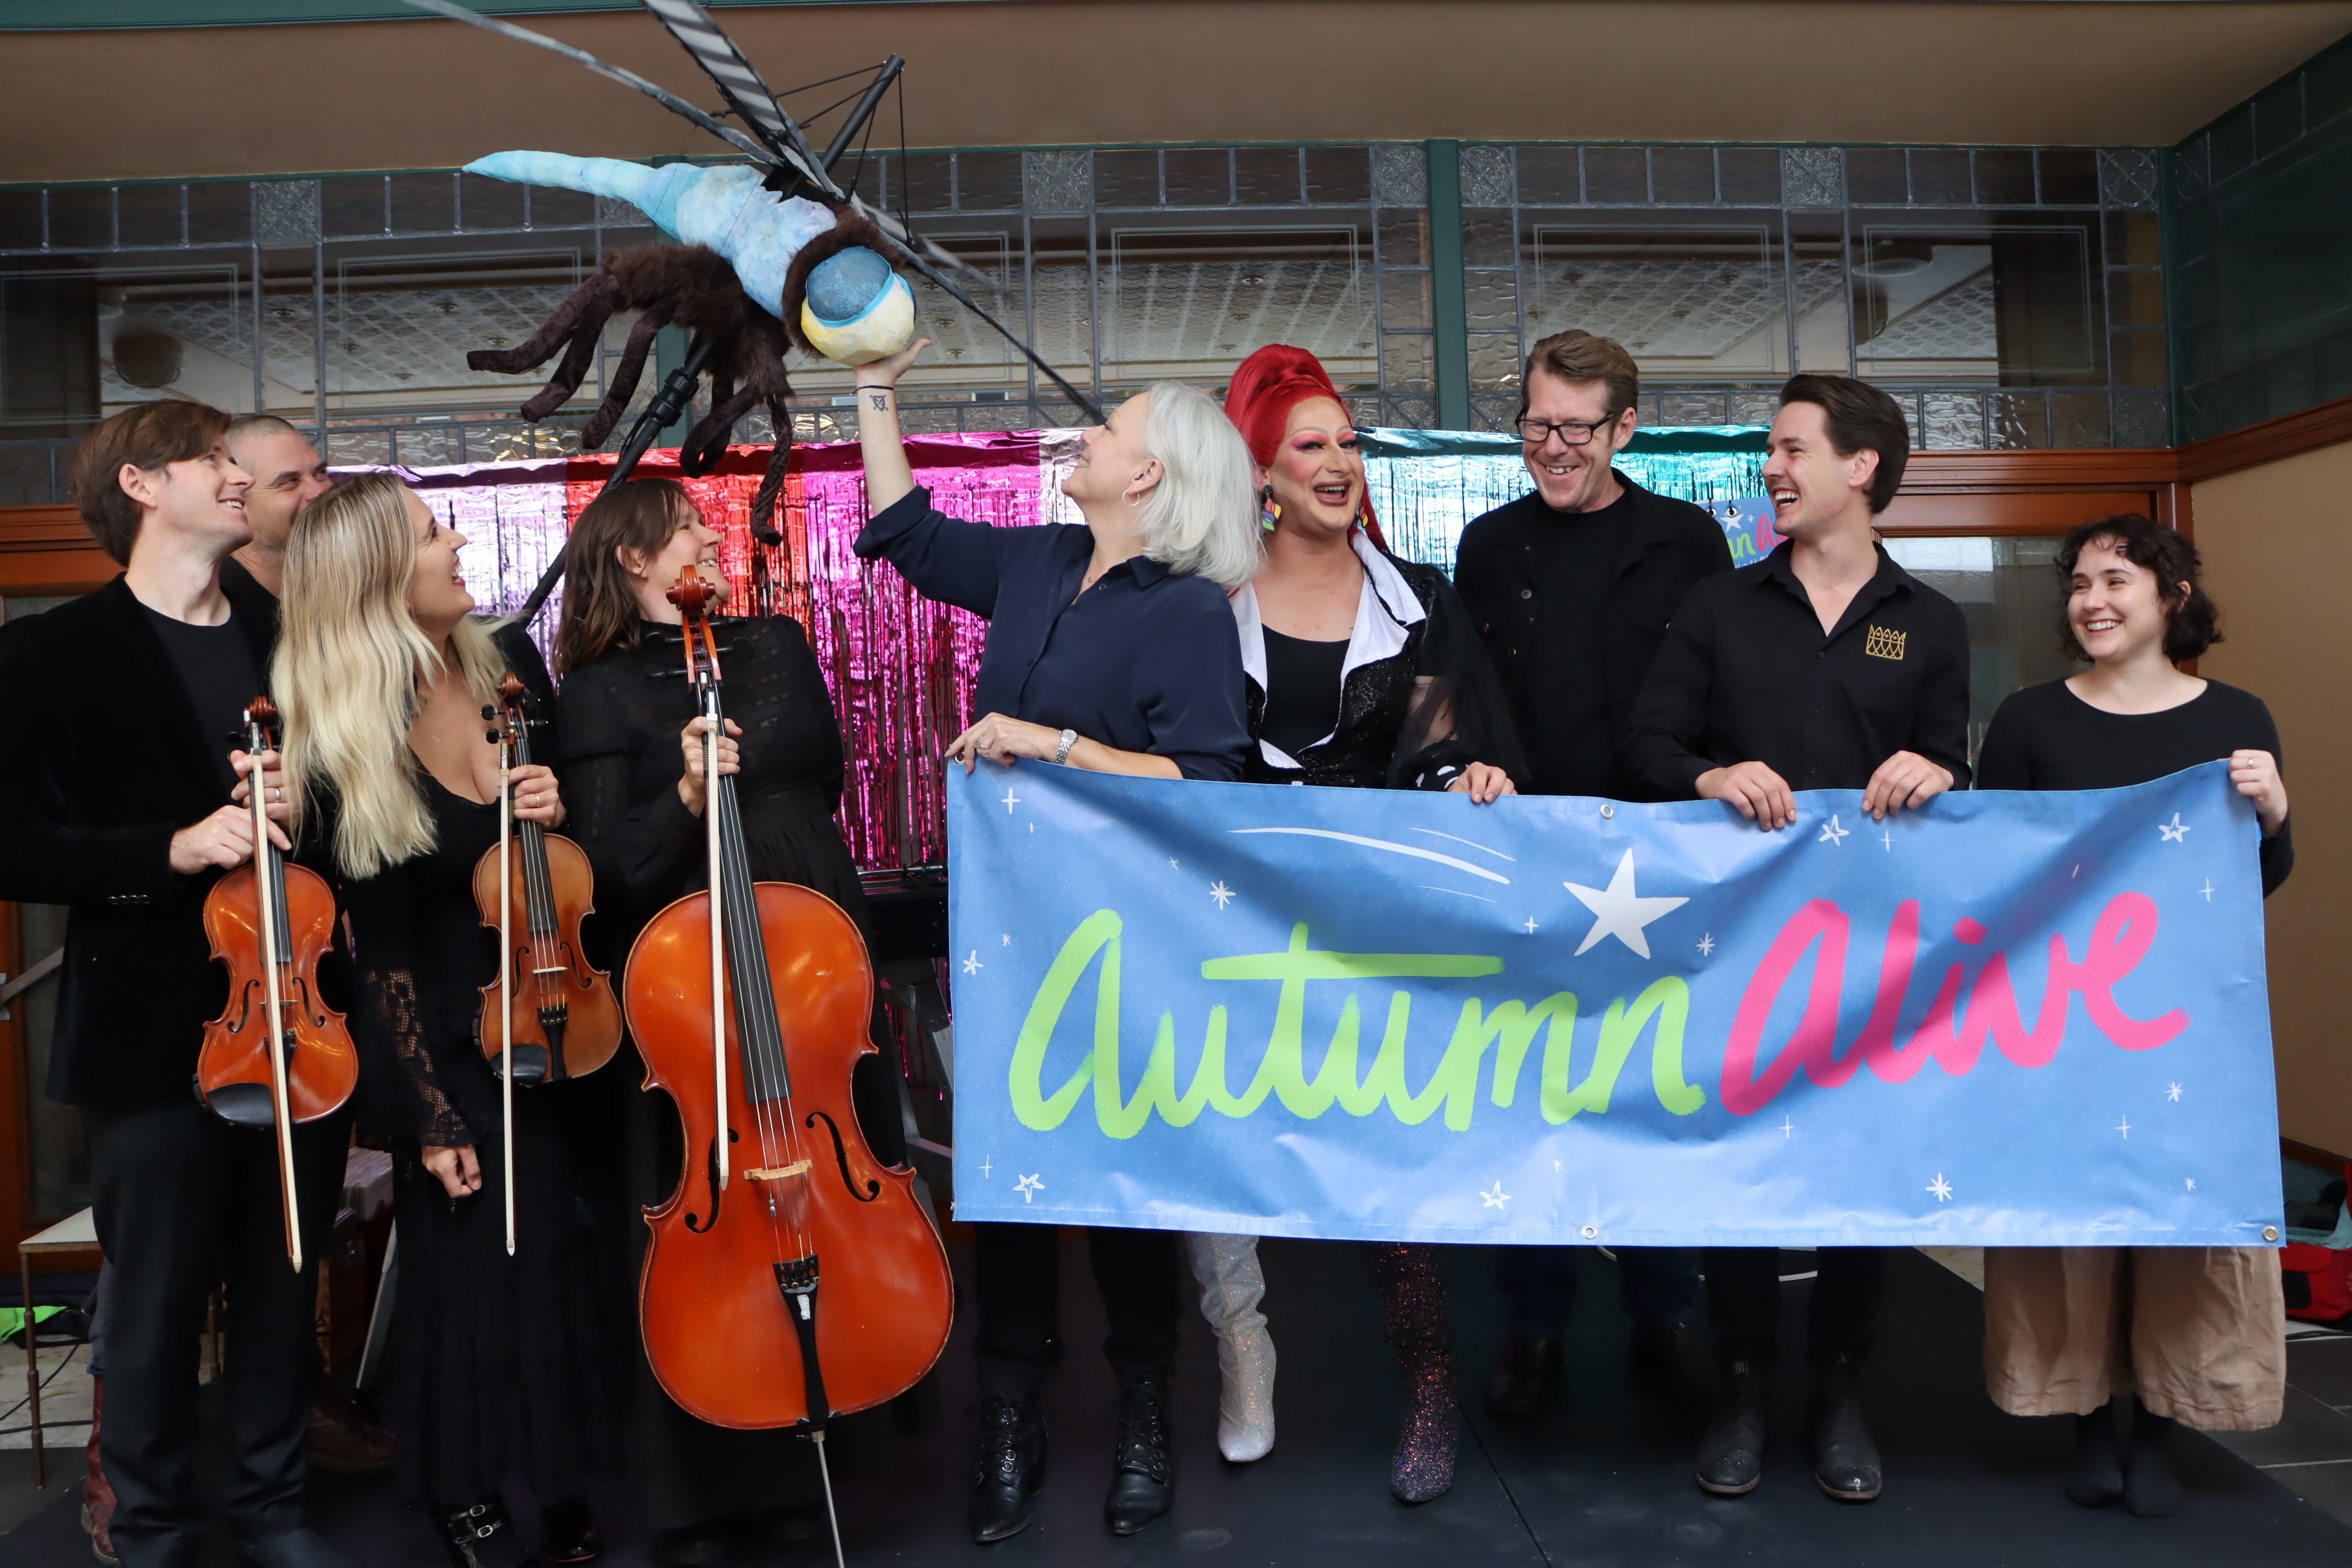 Councillor-Duncan-with-performers-musicians-and-small-business-representatives-at-the-Autumn-Alive-program-launch.JPG